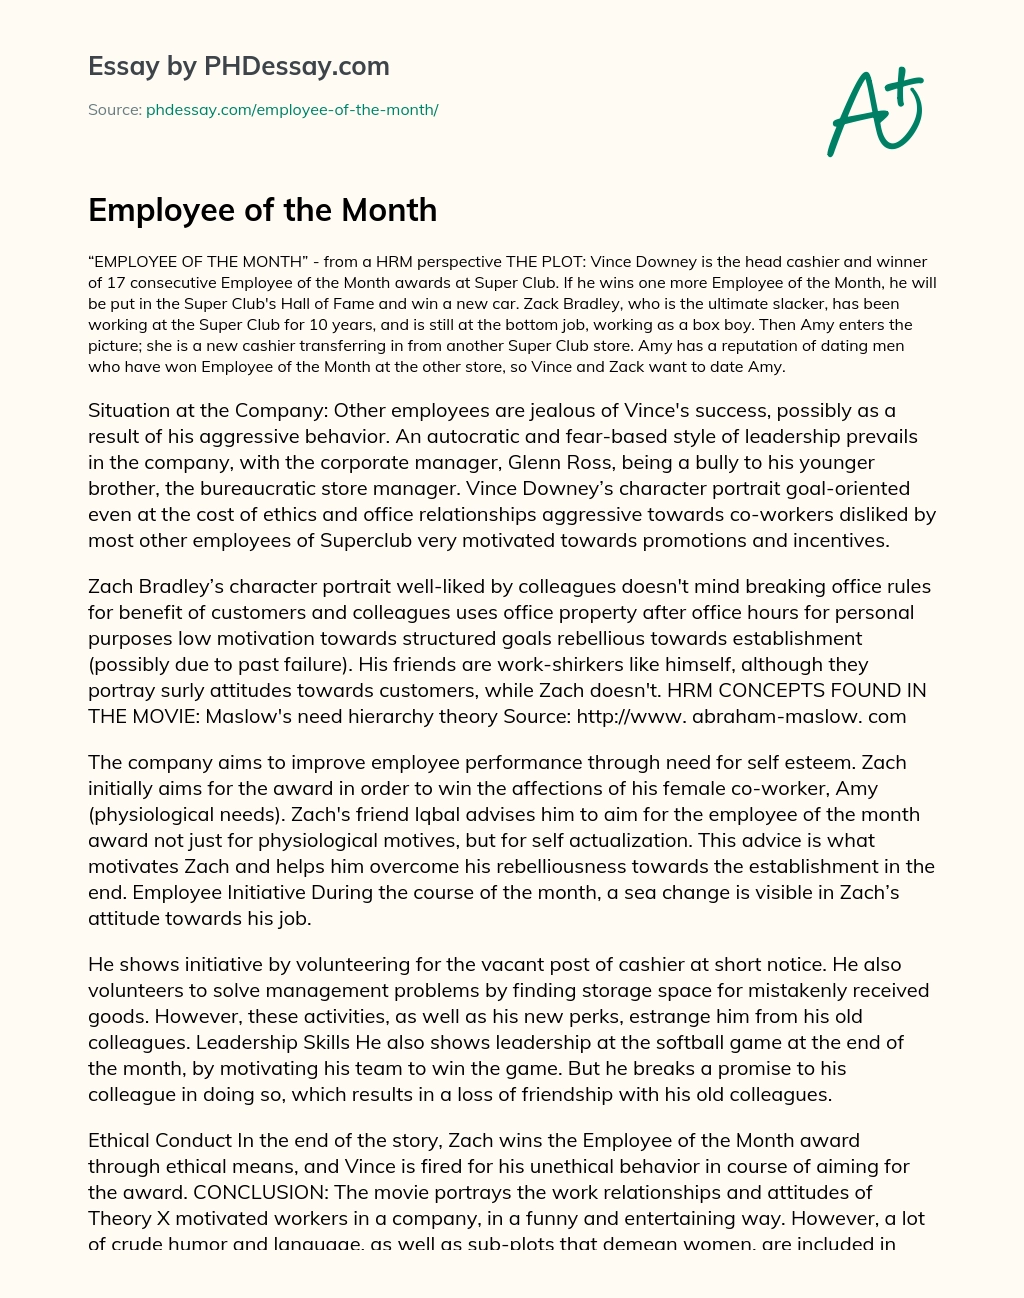 Employee of the Month essay